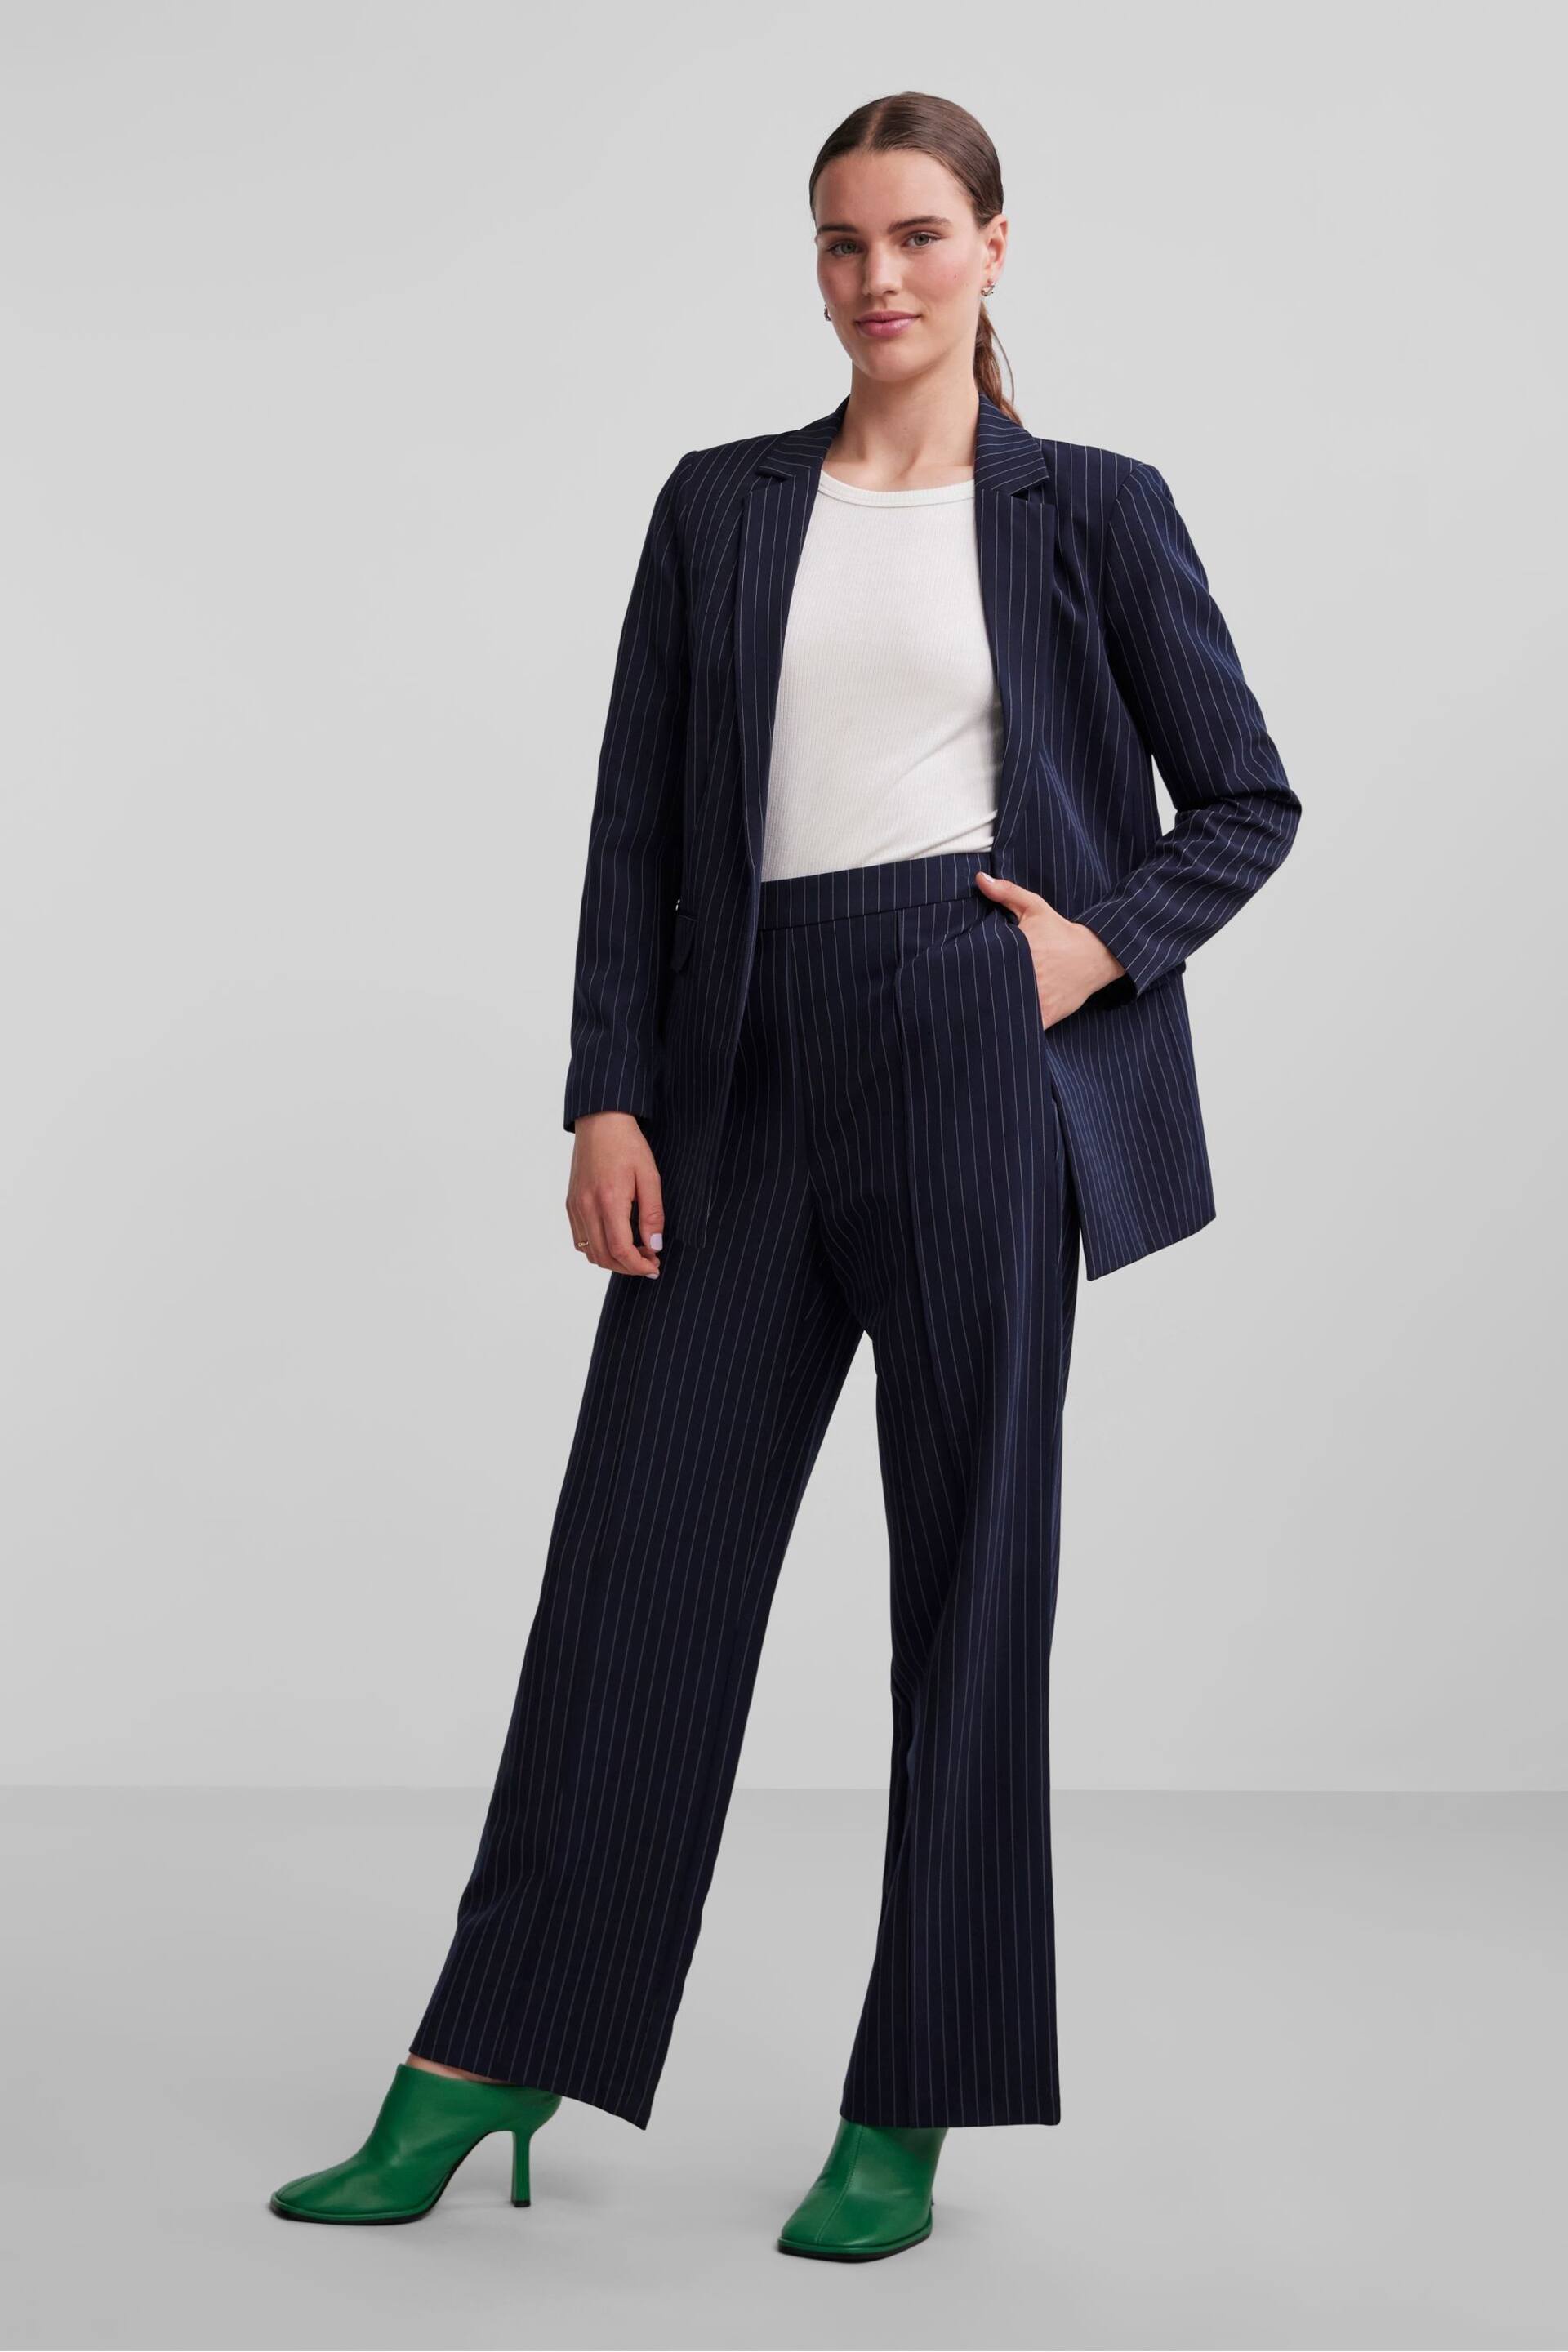 PIECES Blue Pinstripe Relaxed Fit Stretch Blazer - Image 2 of 6